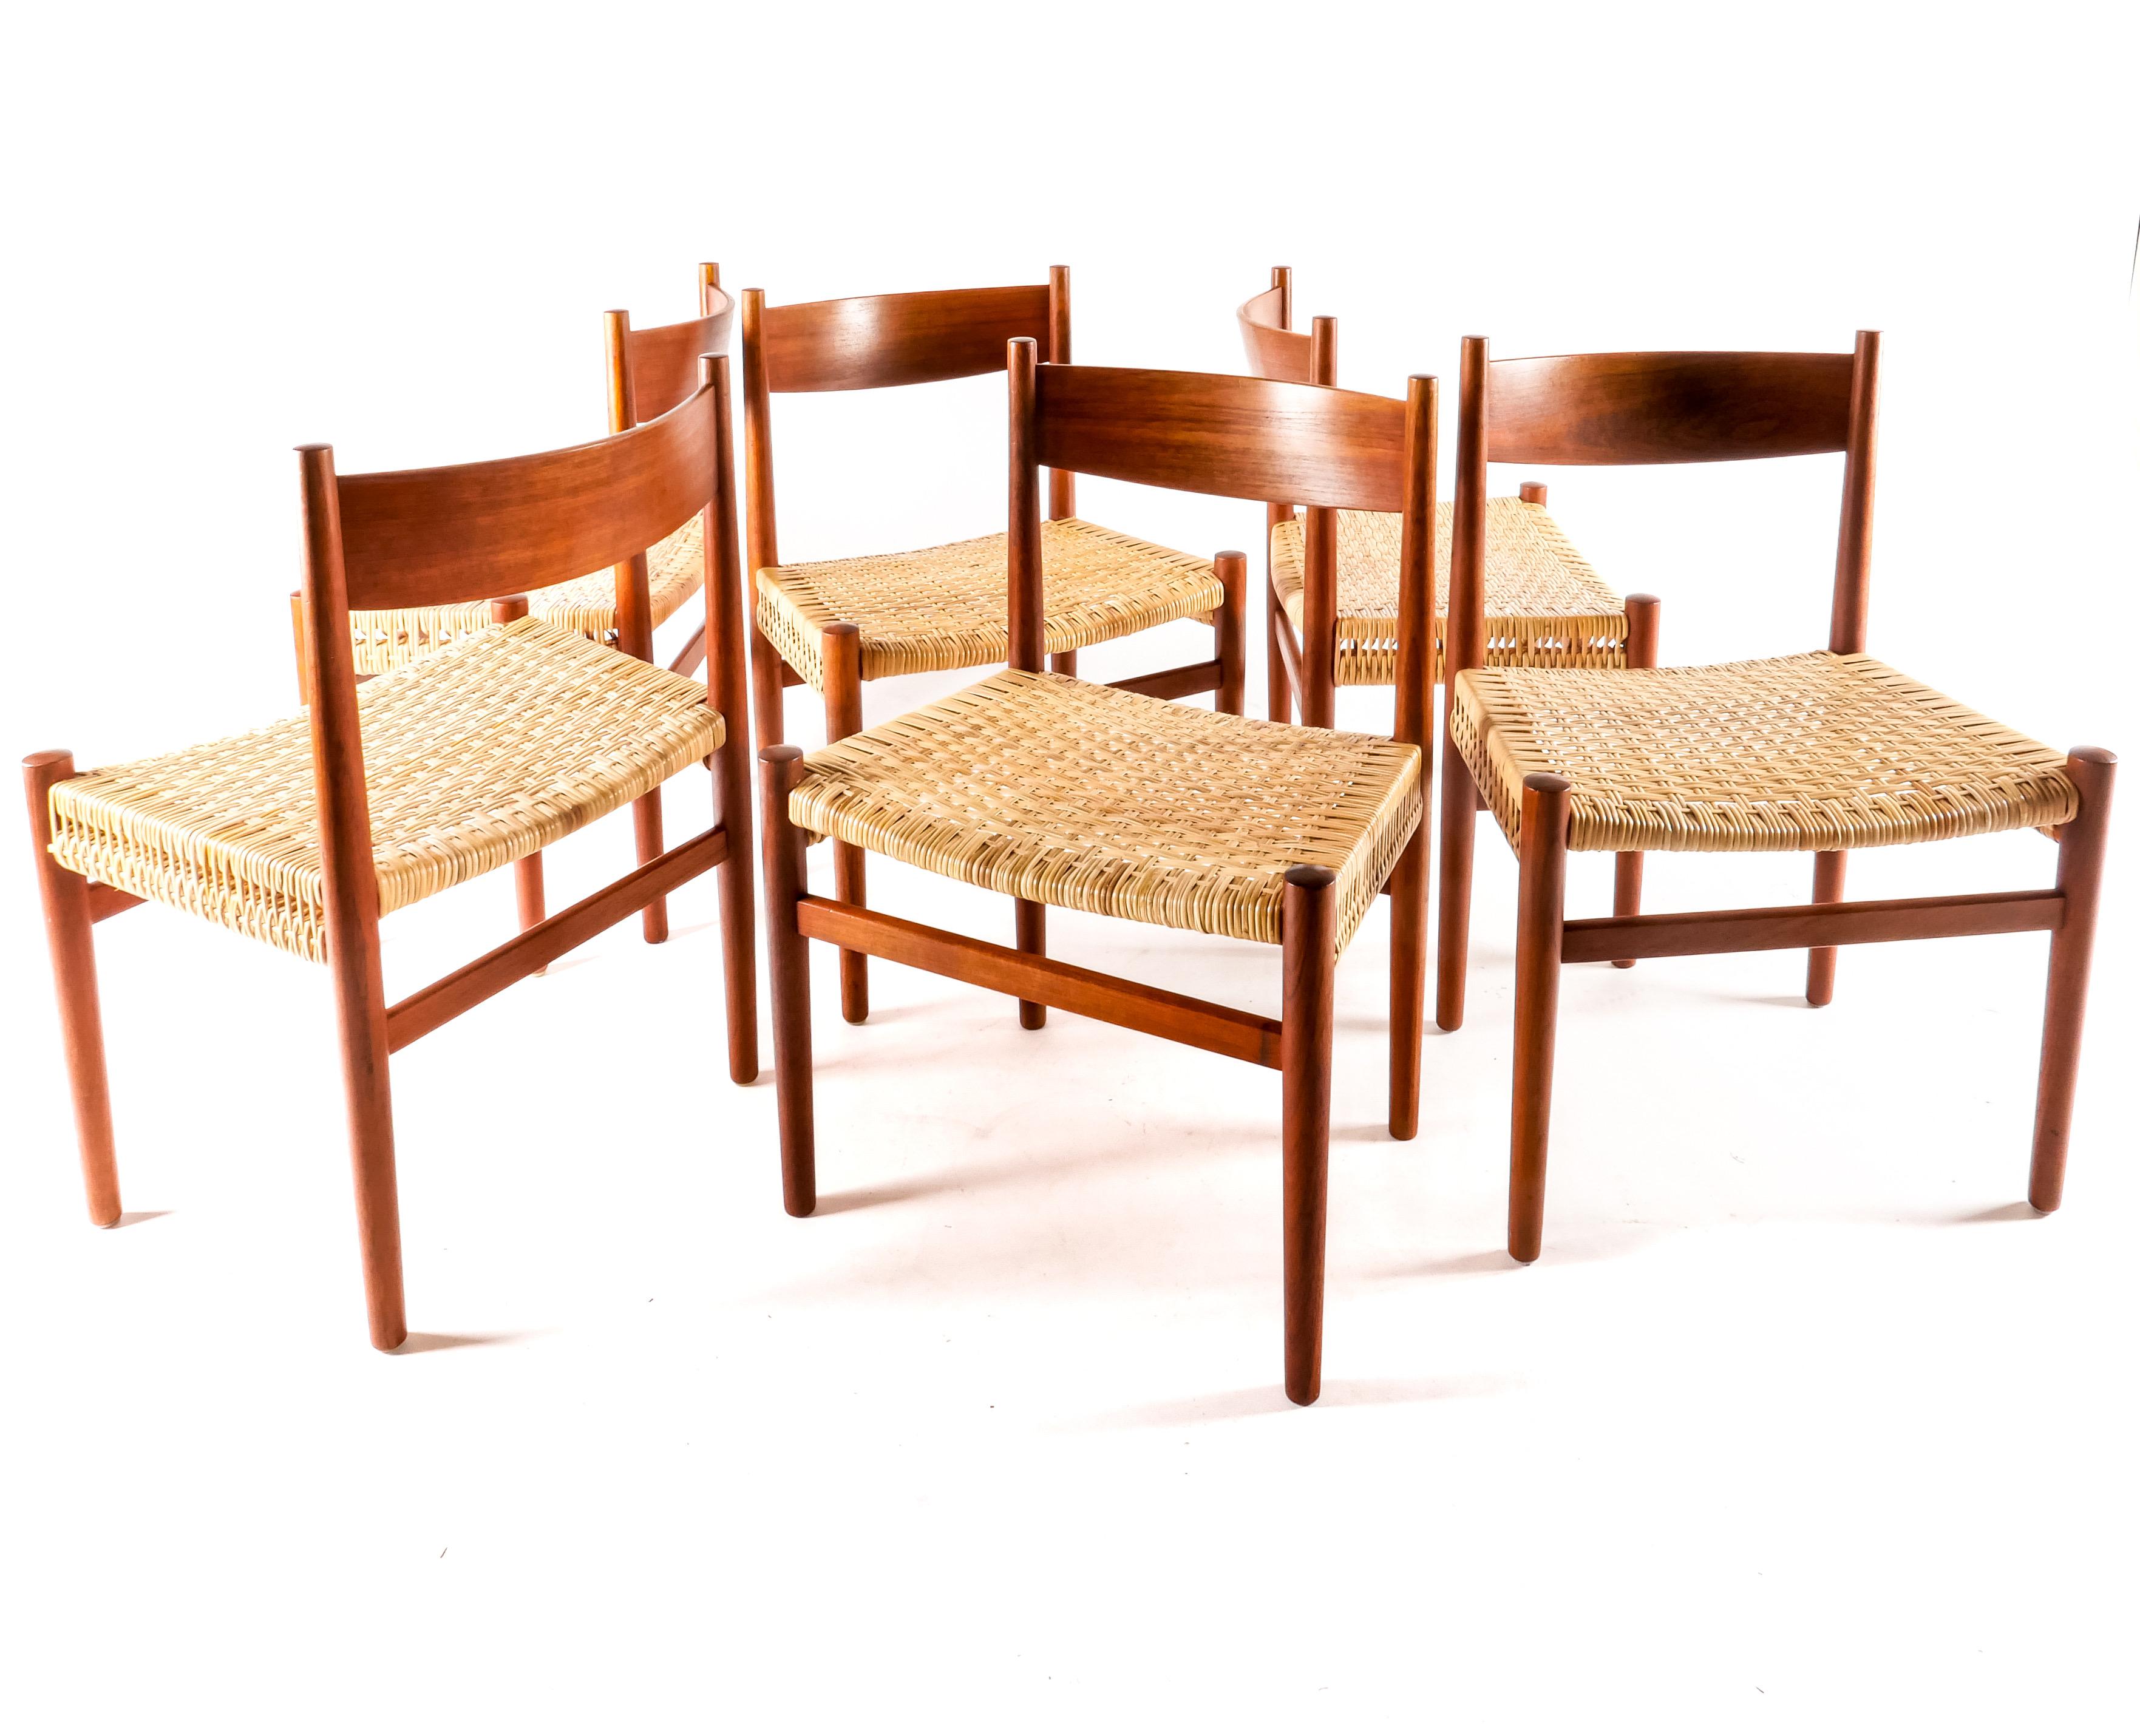 Rare model. CH40 in Teak with hand-caned rattan seats. Set of six side chairs recently imported from Europe. Classic and minimalist design by Hans J. Wegner produced by Carl Hansen Denmark circa 1960s. Seats have all just been professionally rewoven